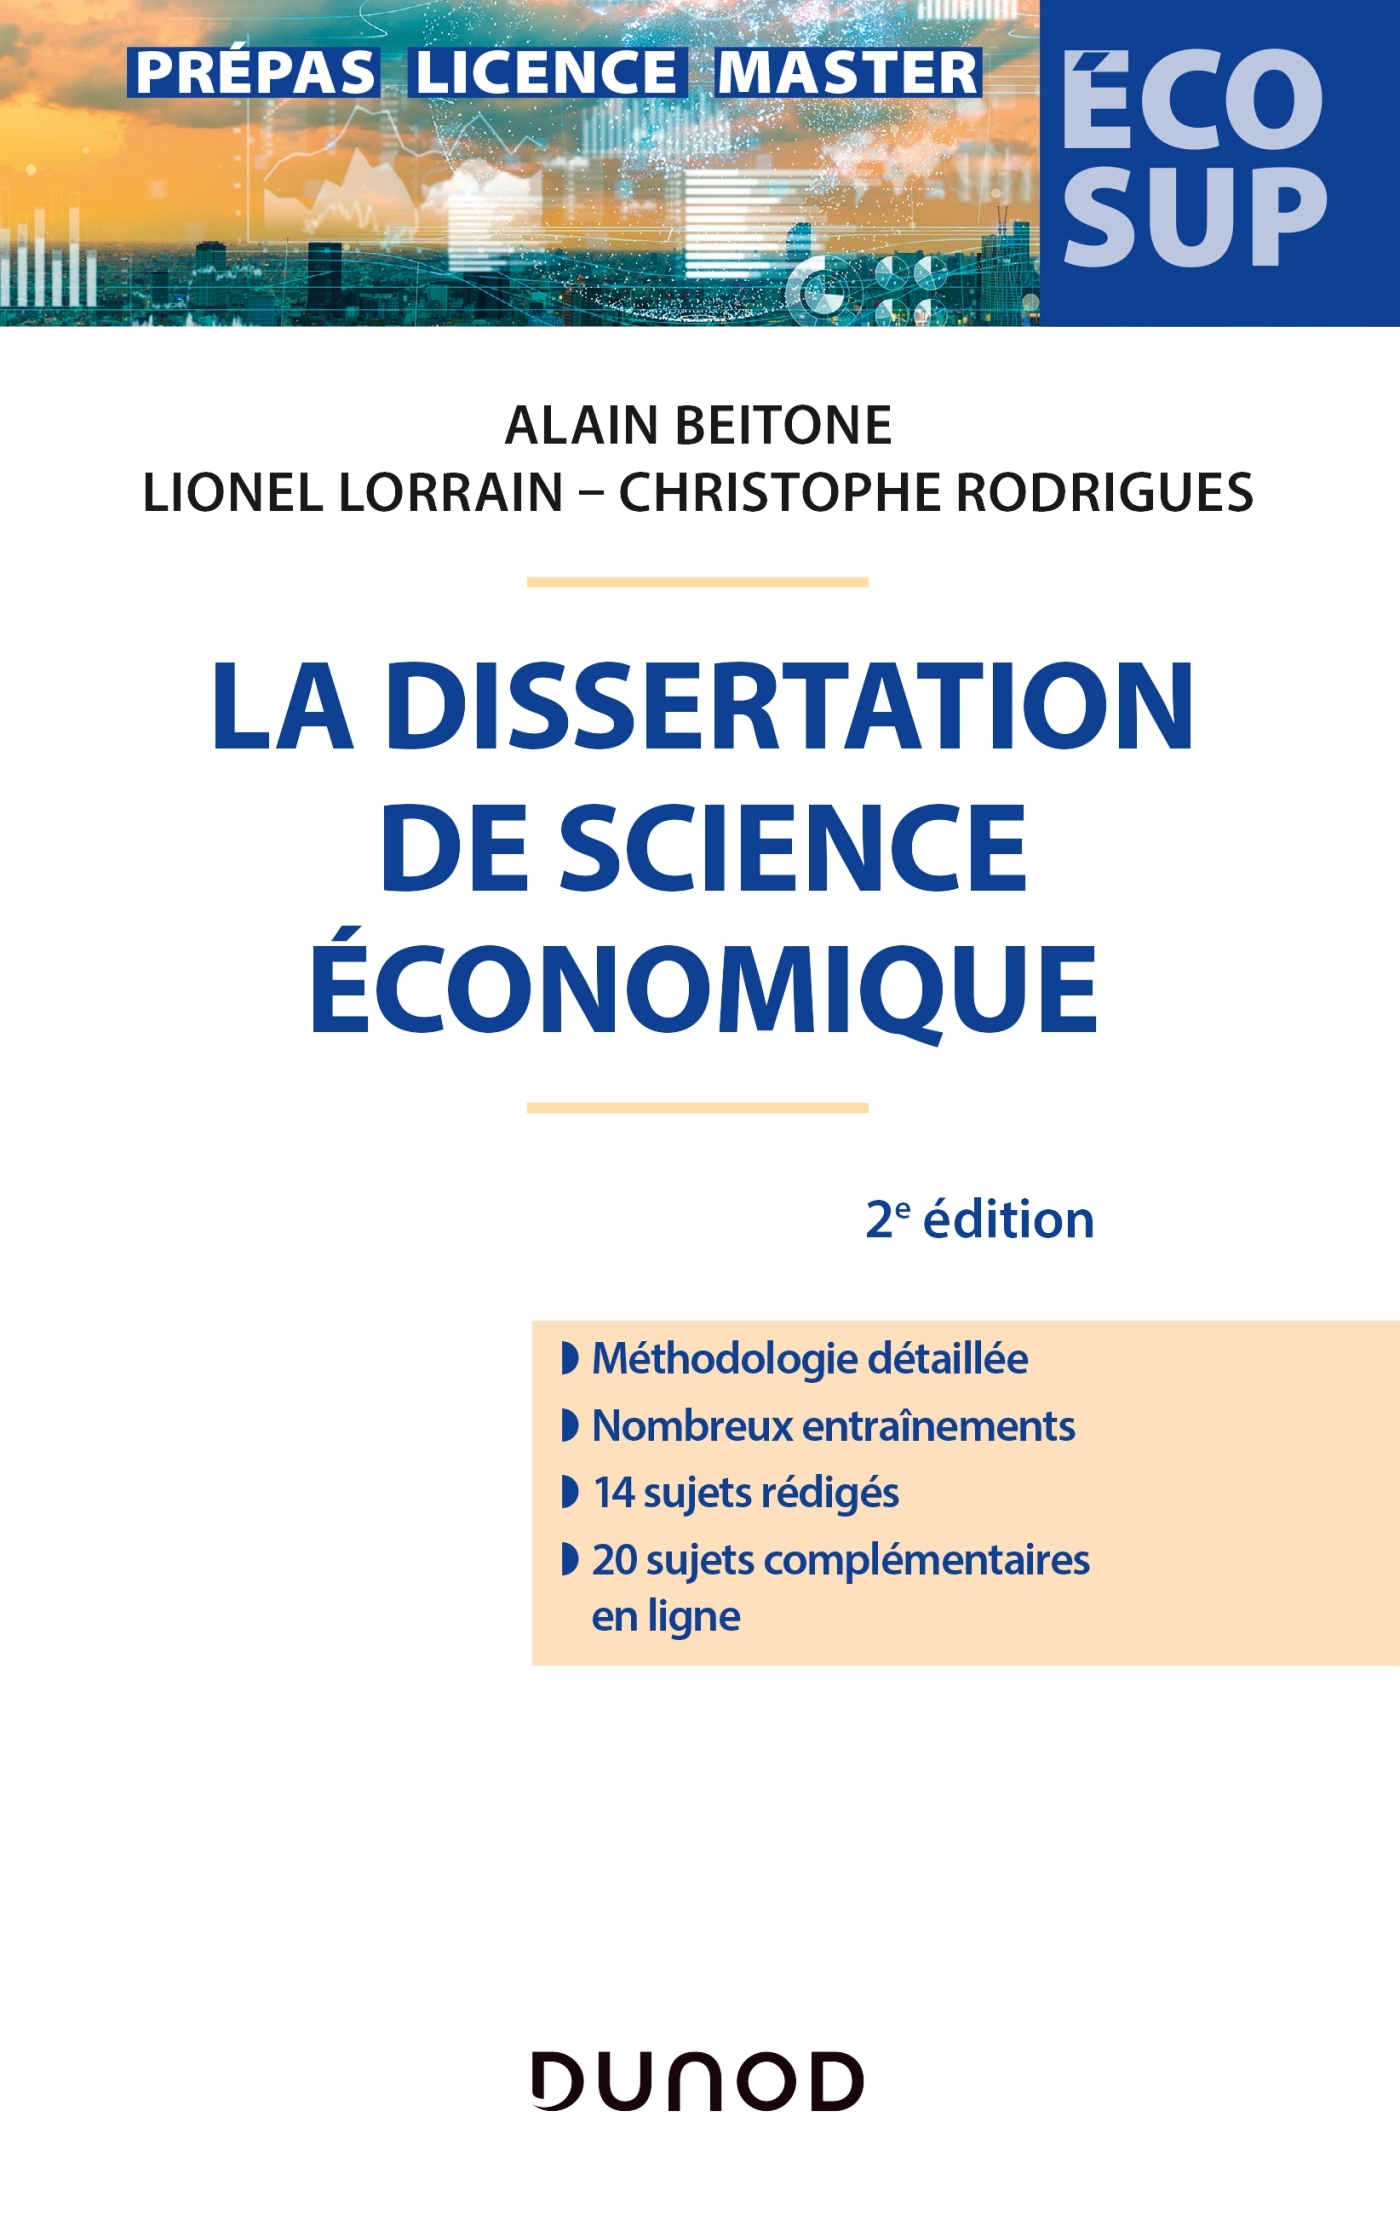 Umi dissertation abstract database